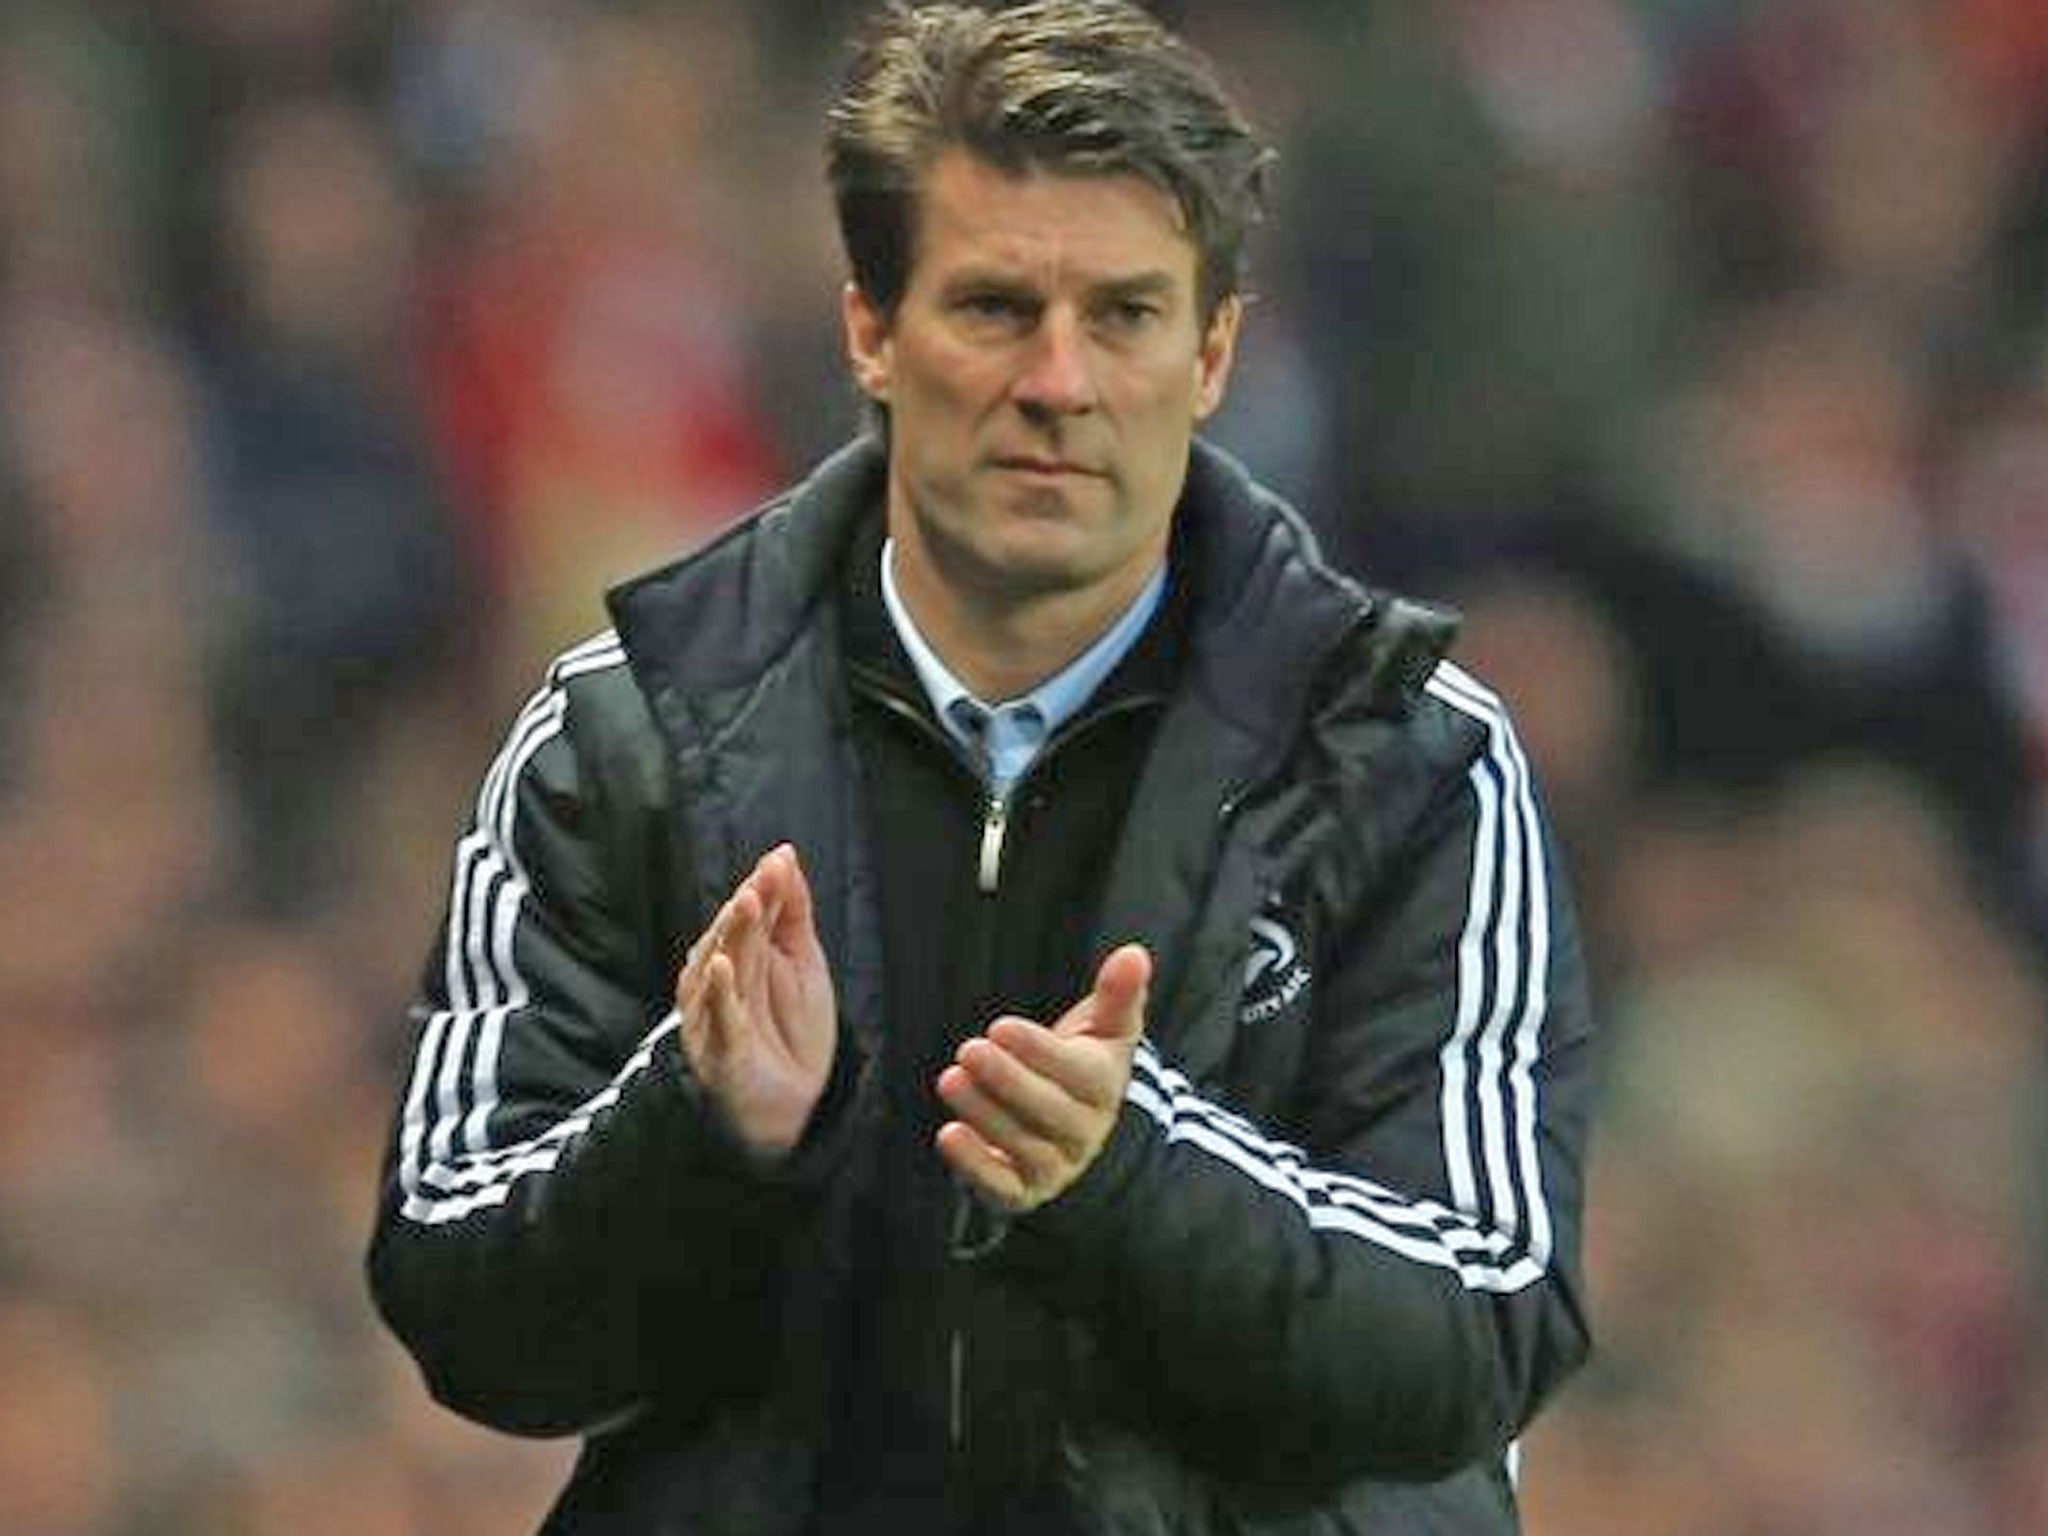 Swansea manager Michael Laudrup said he has no ambition to manage clubs like Real Madrid or Chelsea